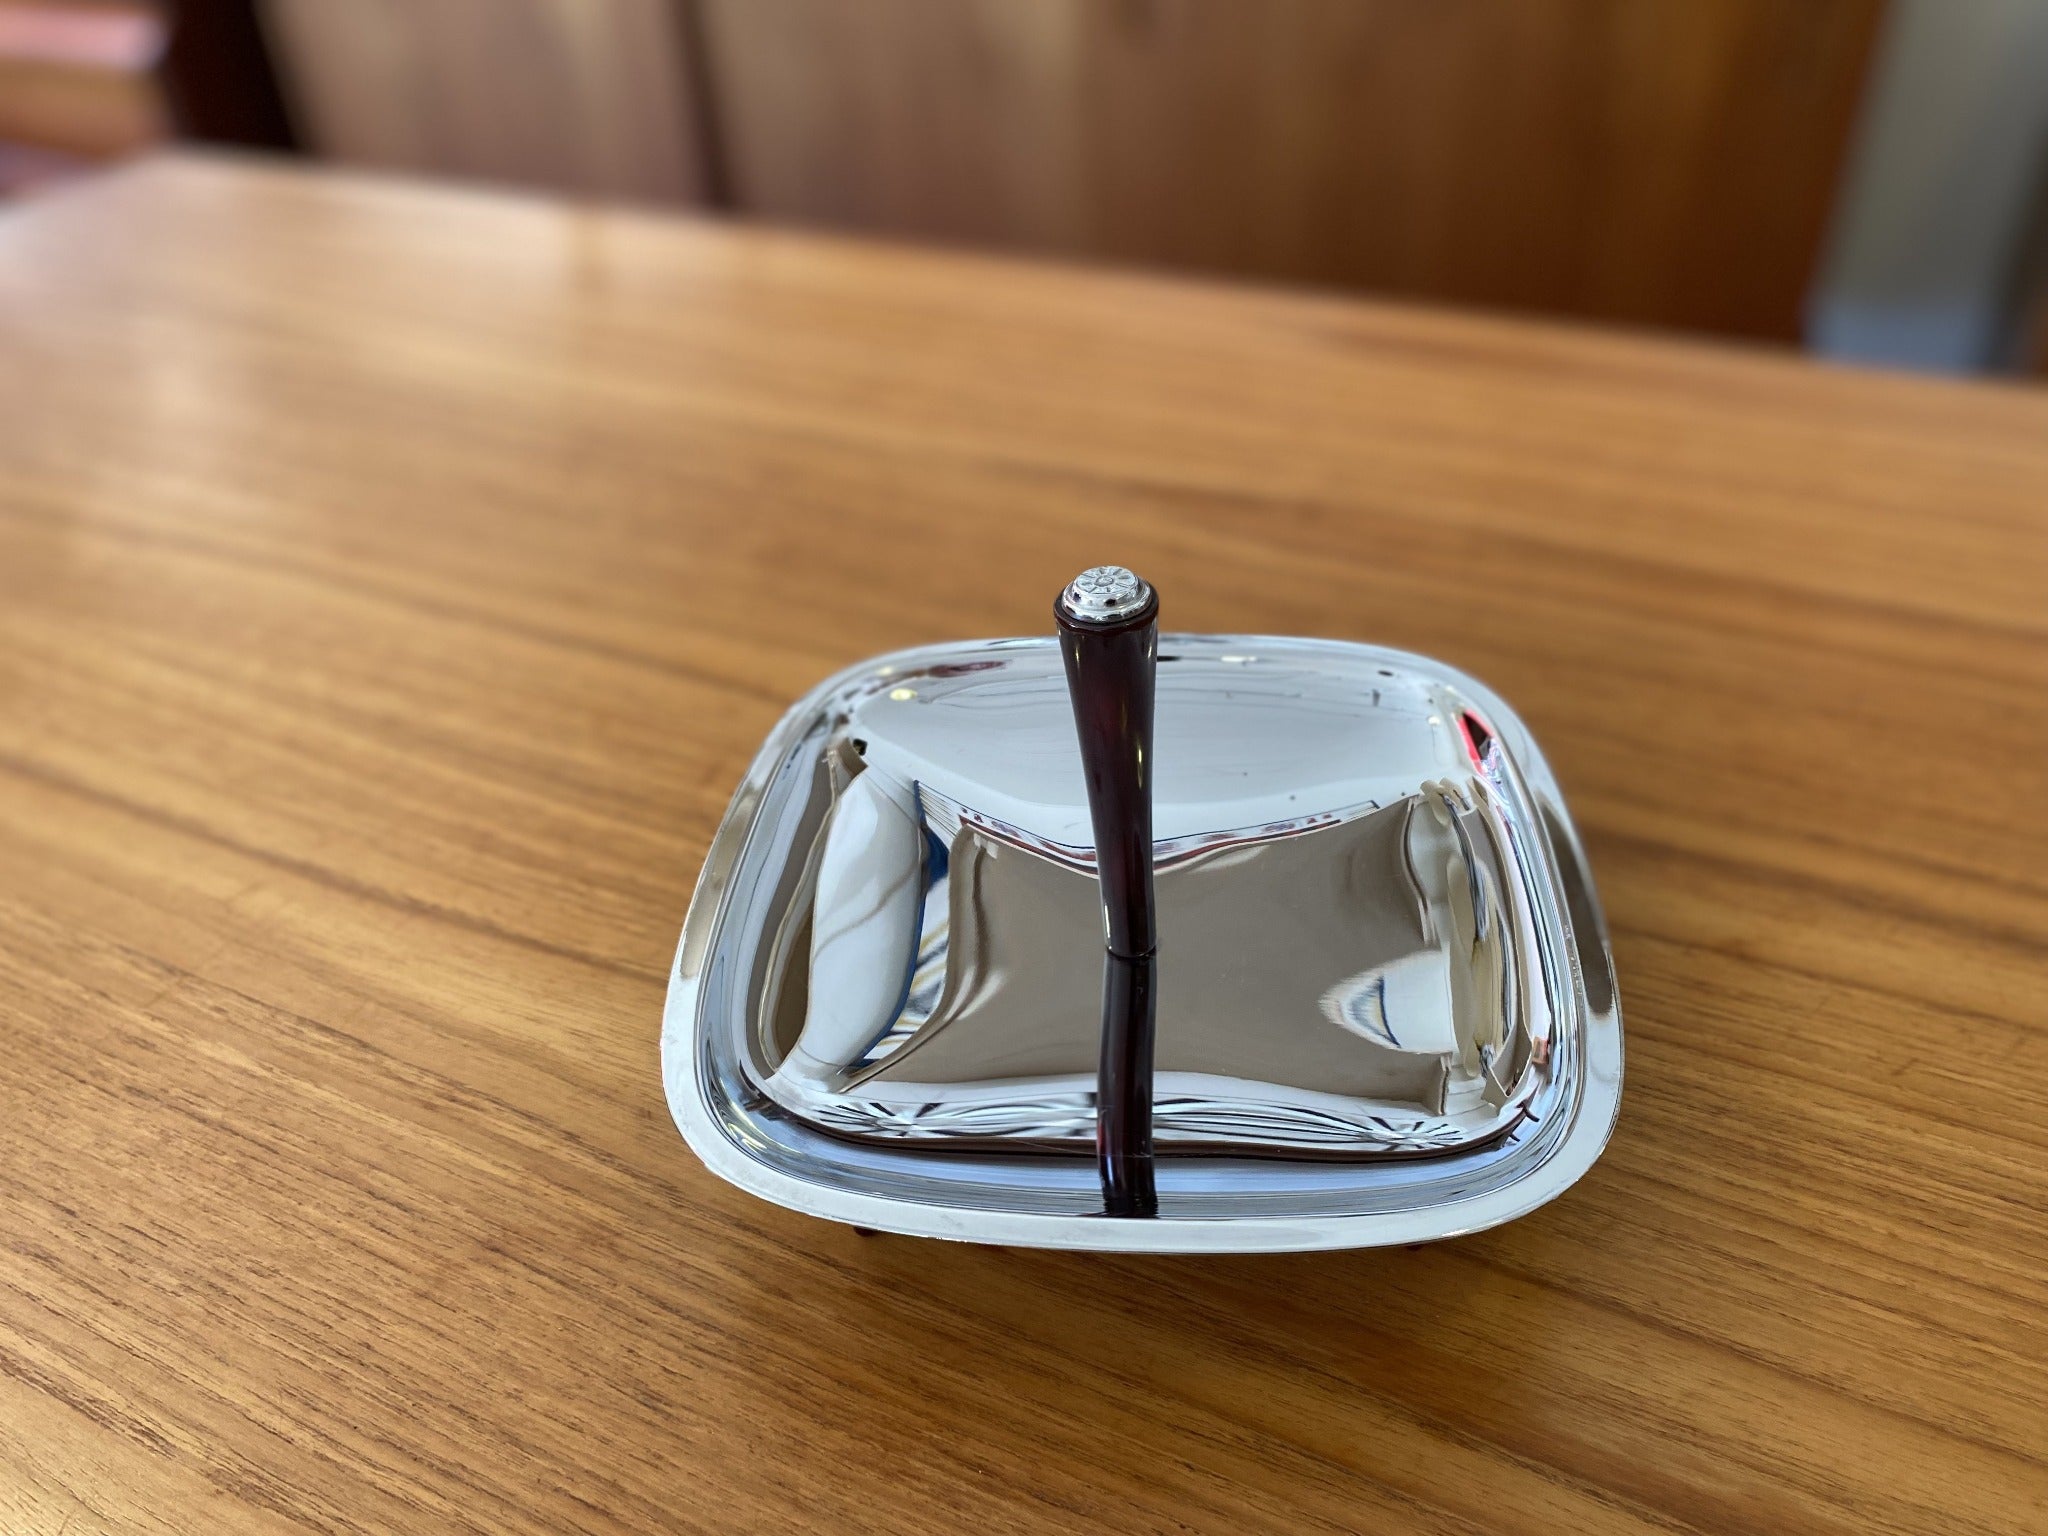 Top view of Gourmates Glo-Hill small stainless steel and bakelite serving dish- Cook Street Vintage